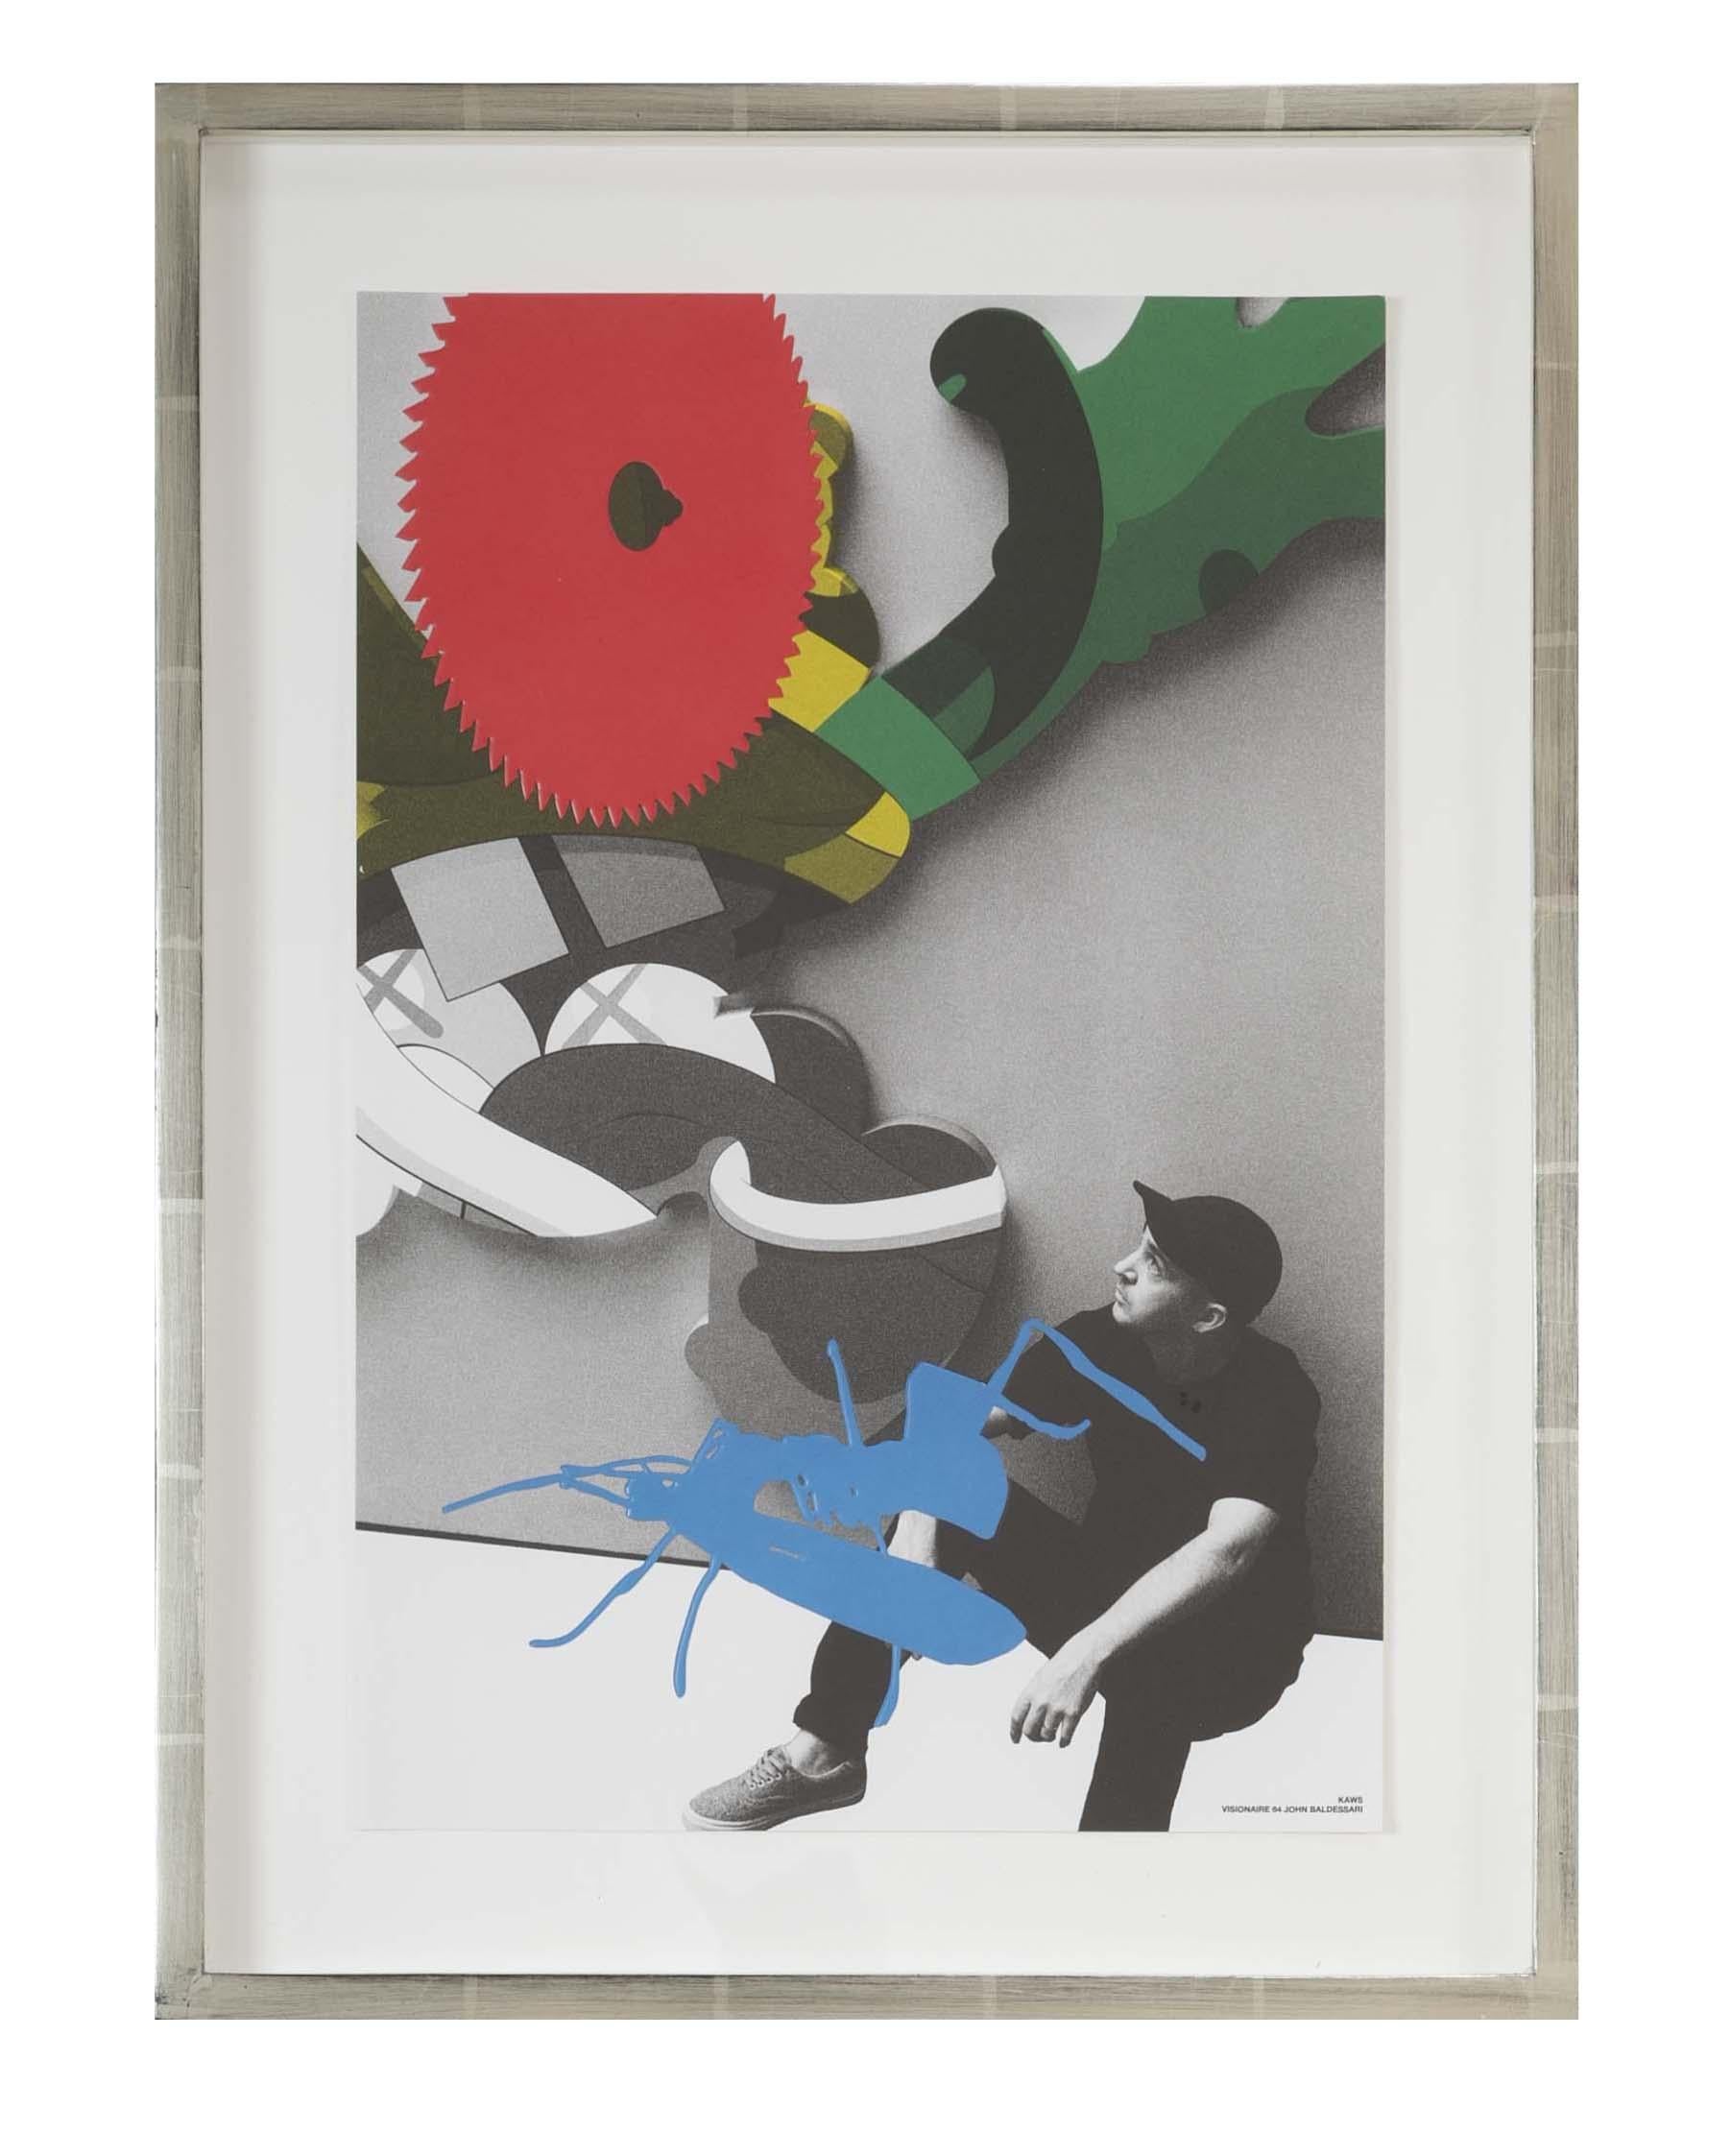 VISIONAIRE/64 ART: JOHN BALDESSARI 

This project by Visionaire in collaboration with John Baldessari exploits the current ease of digital assemblage and self-portraiture.  Visionaire paired legendary conceptual artist John Baldessari with